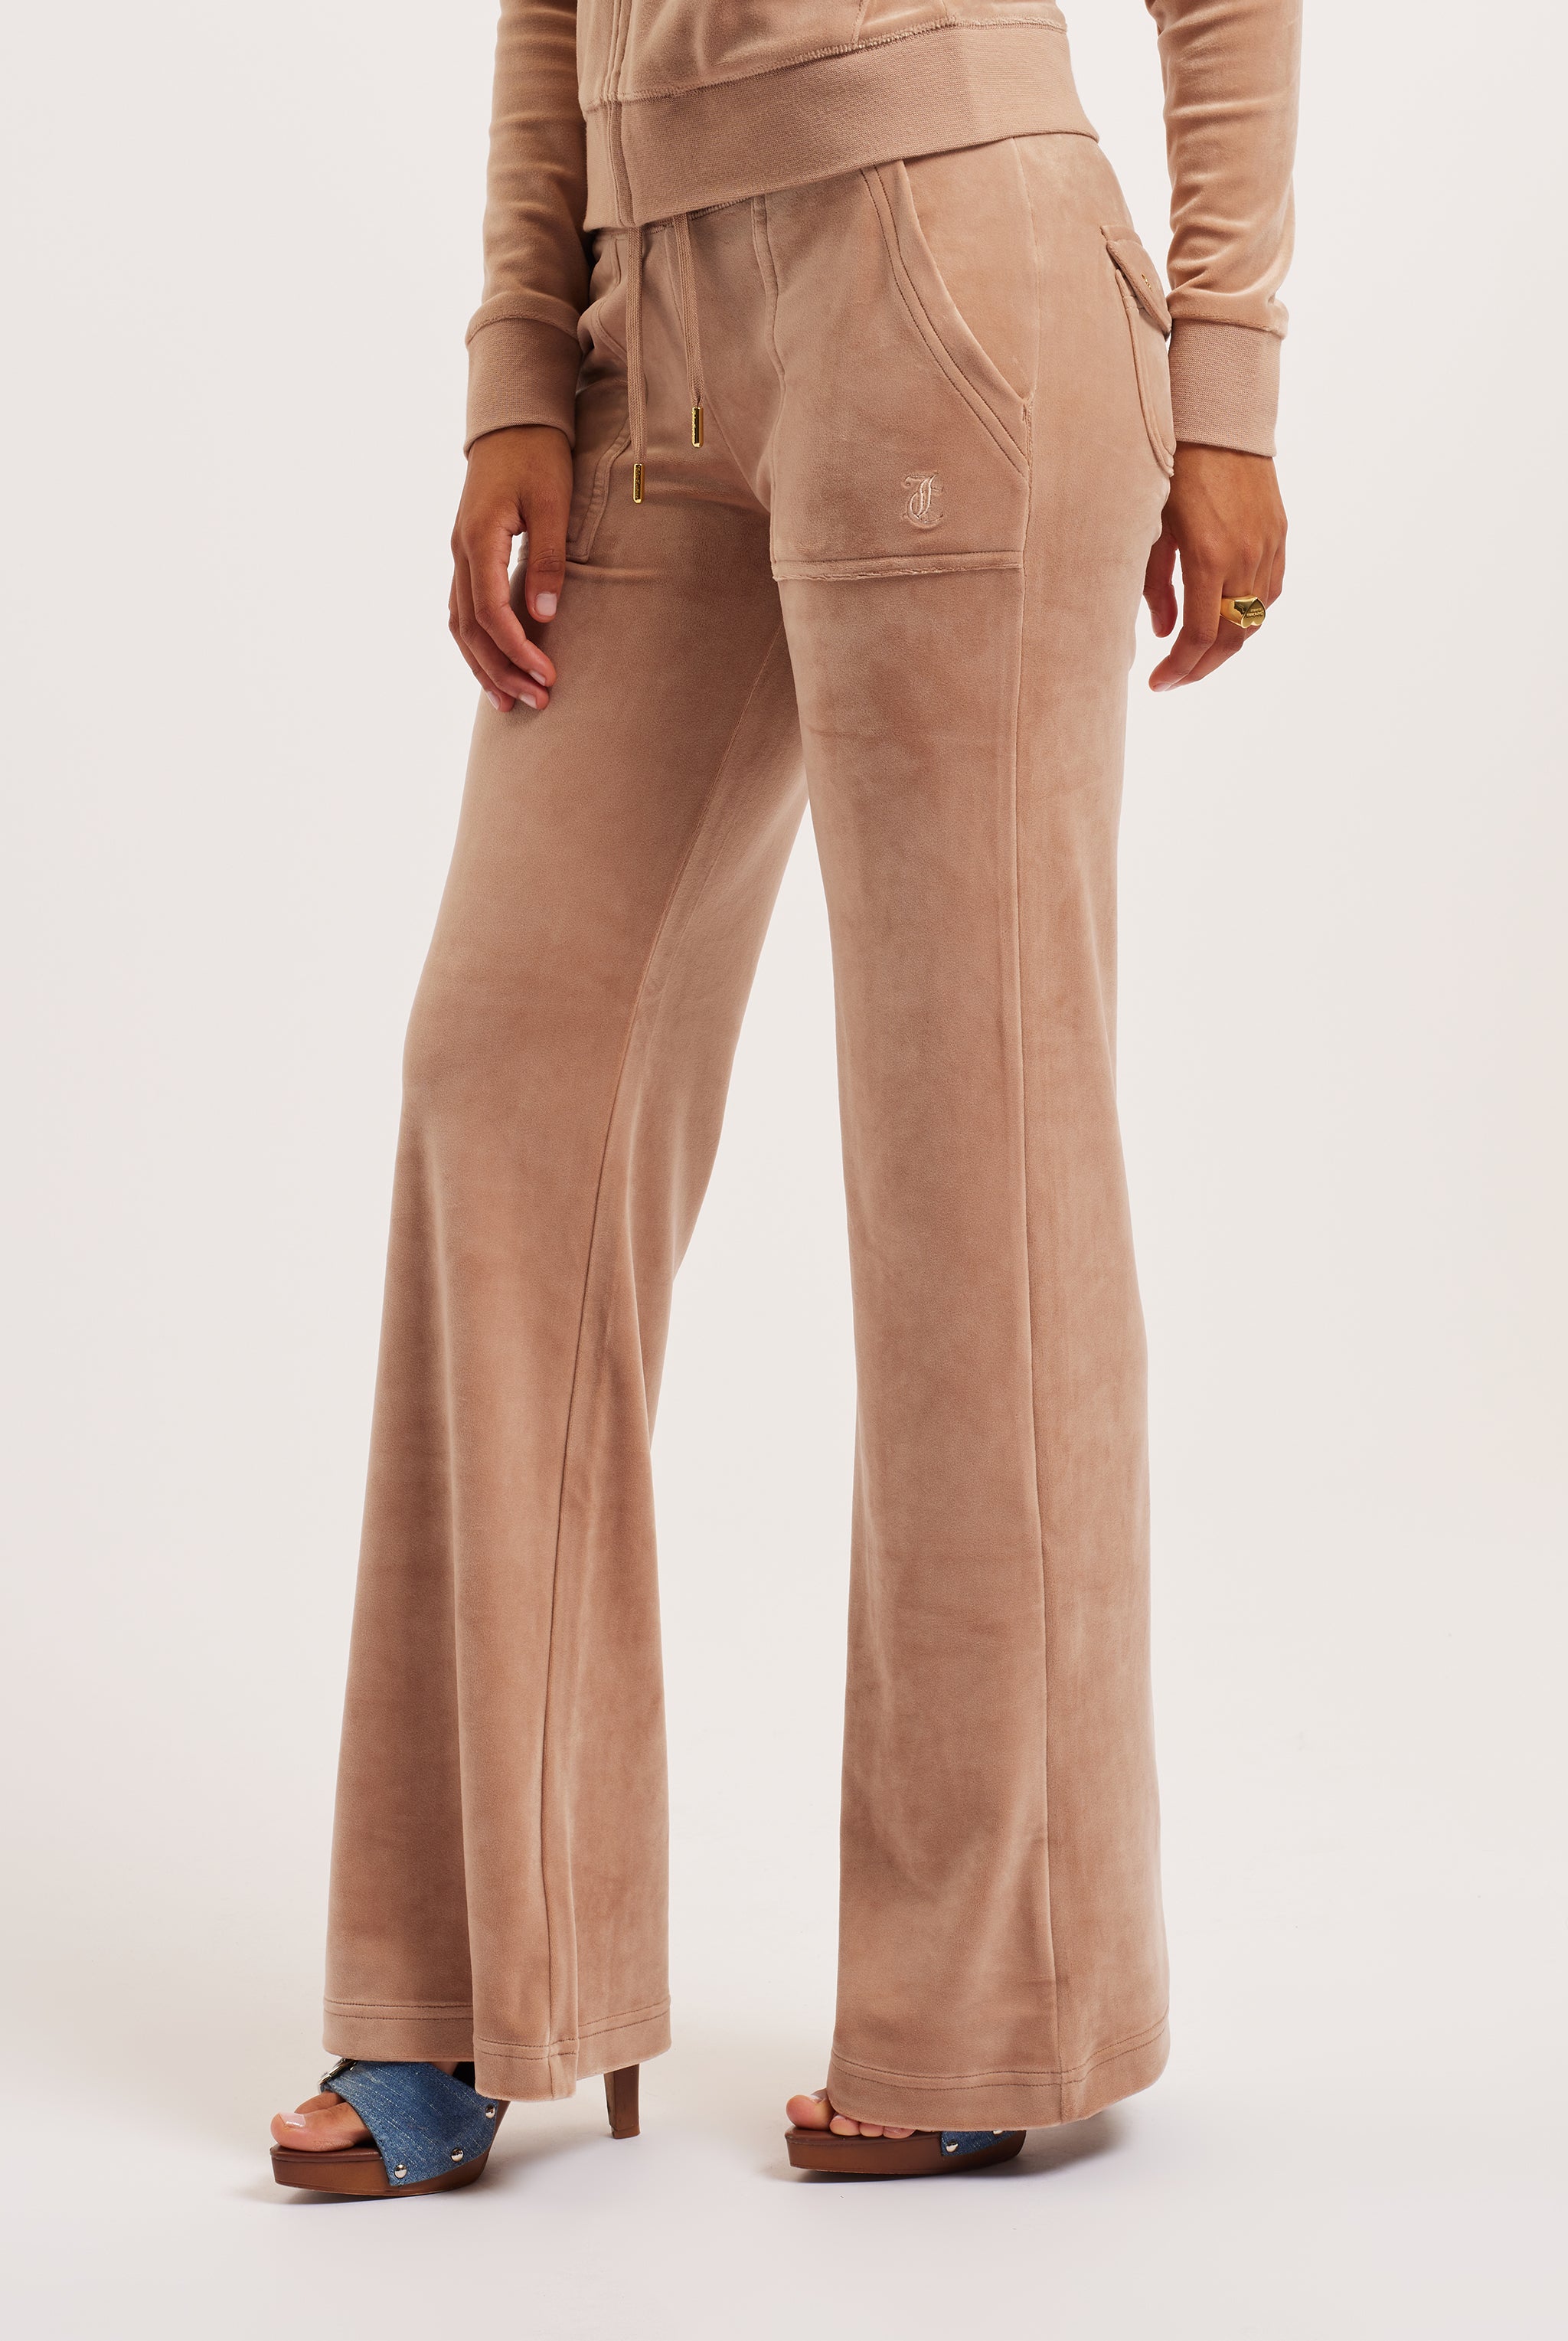 CARAMEL & GOLD CLASSIC VELOUR DEL RAY POCKETED BOTTOMS – Juicy